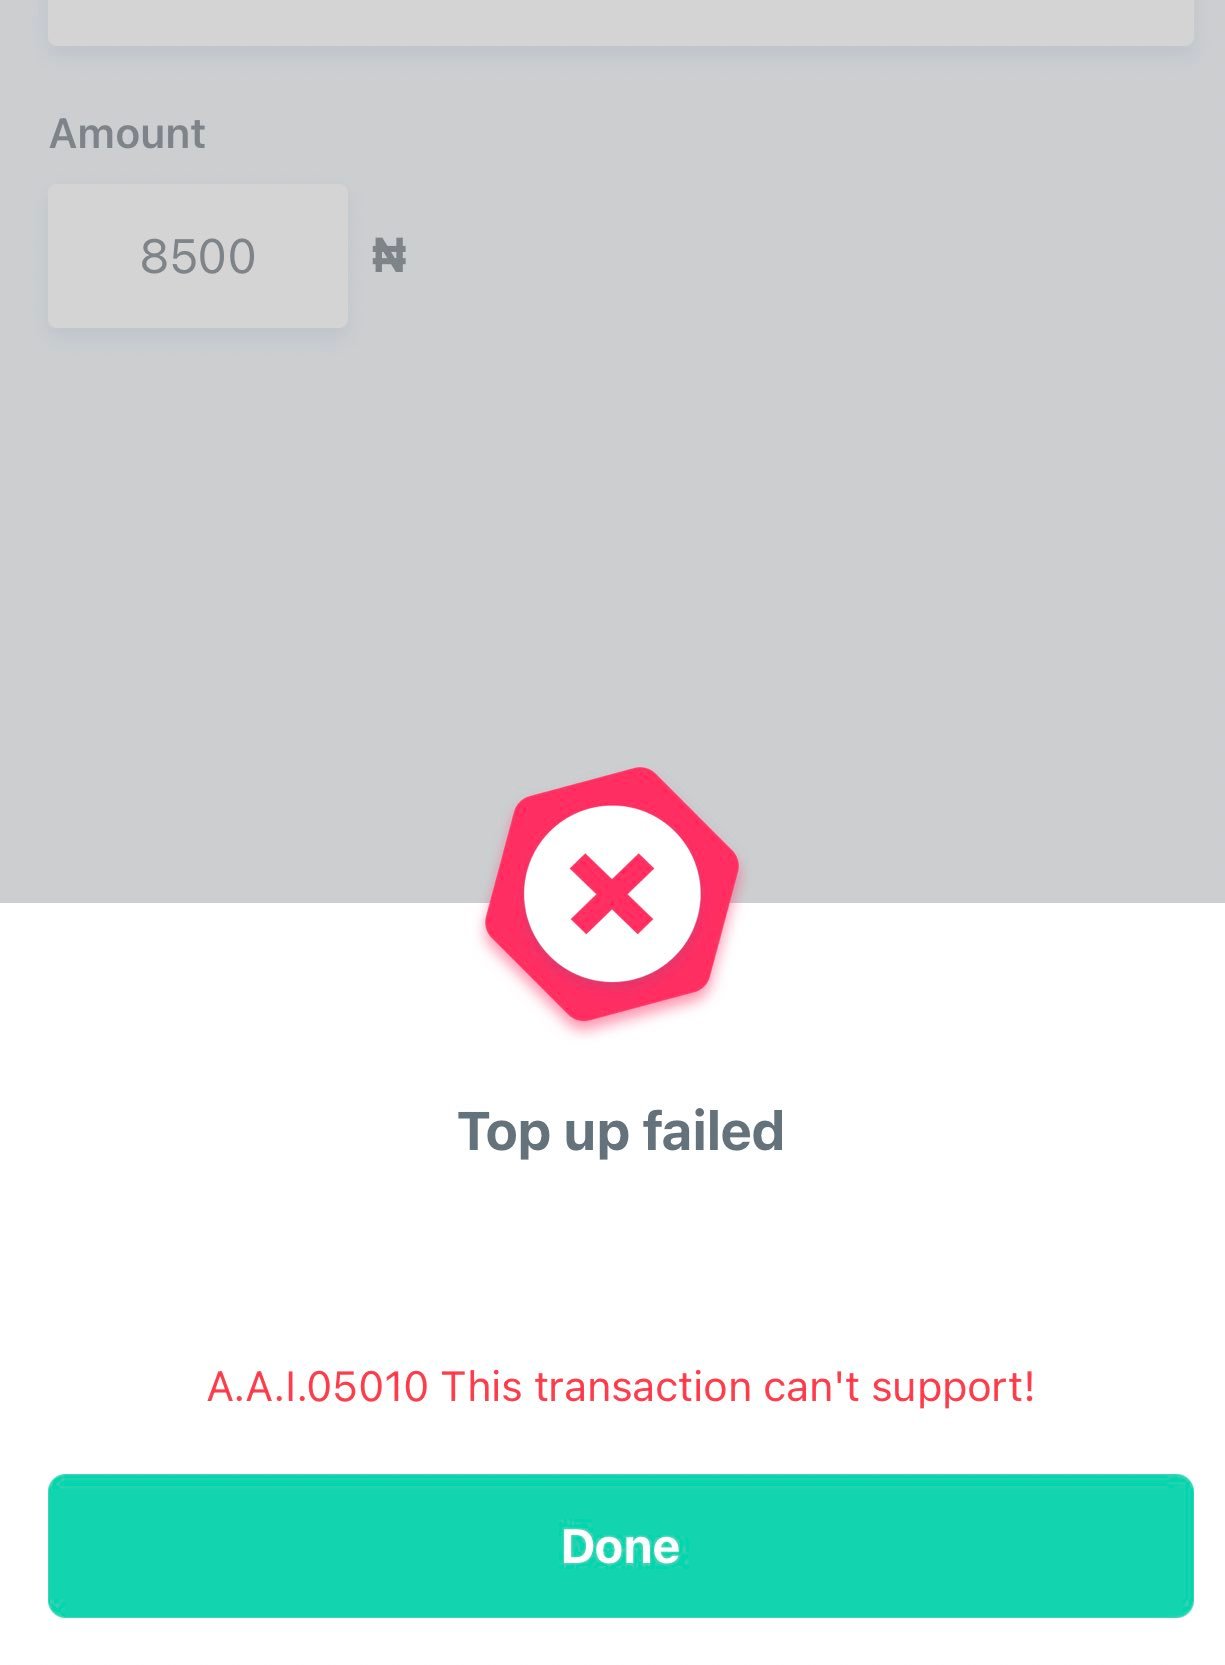 Opay Failed Transactions: How to Cancel Pending Transactions on Opay